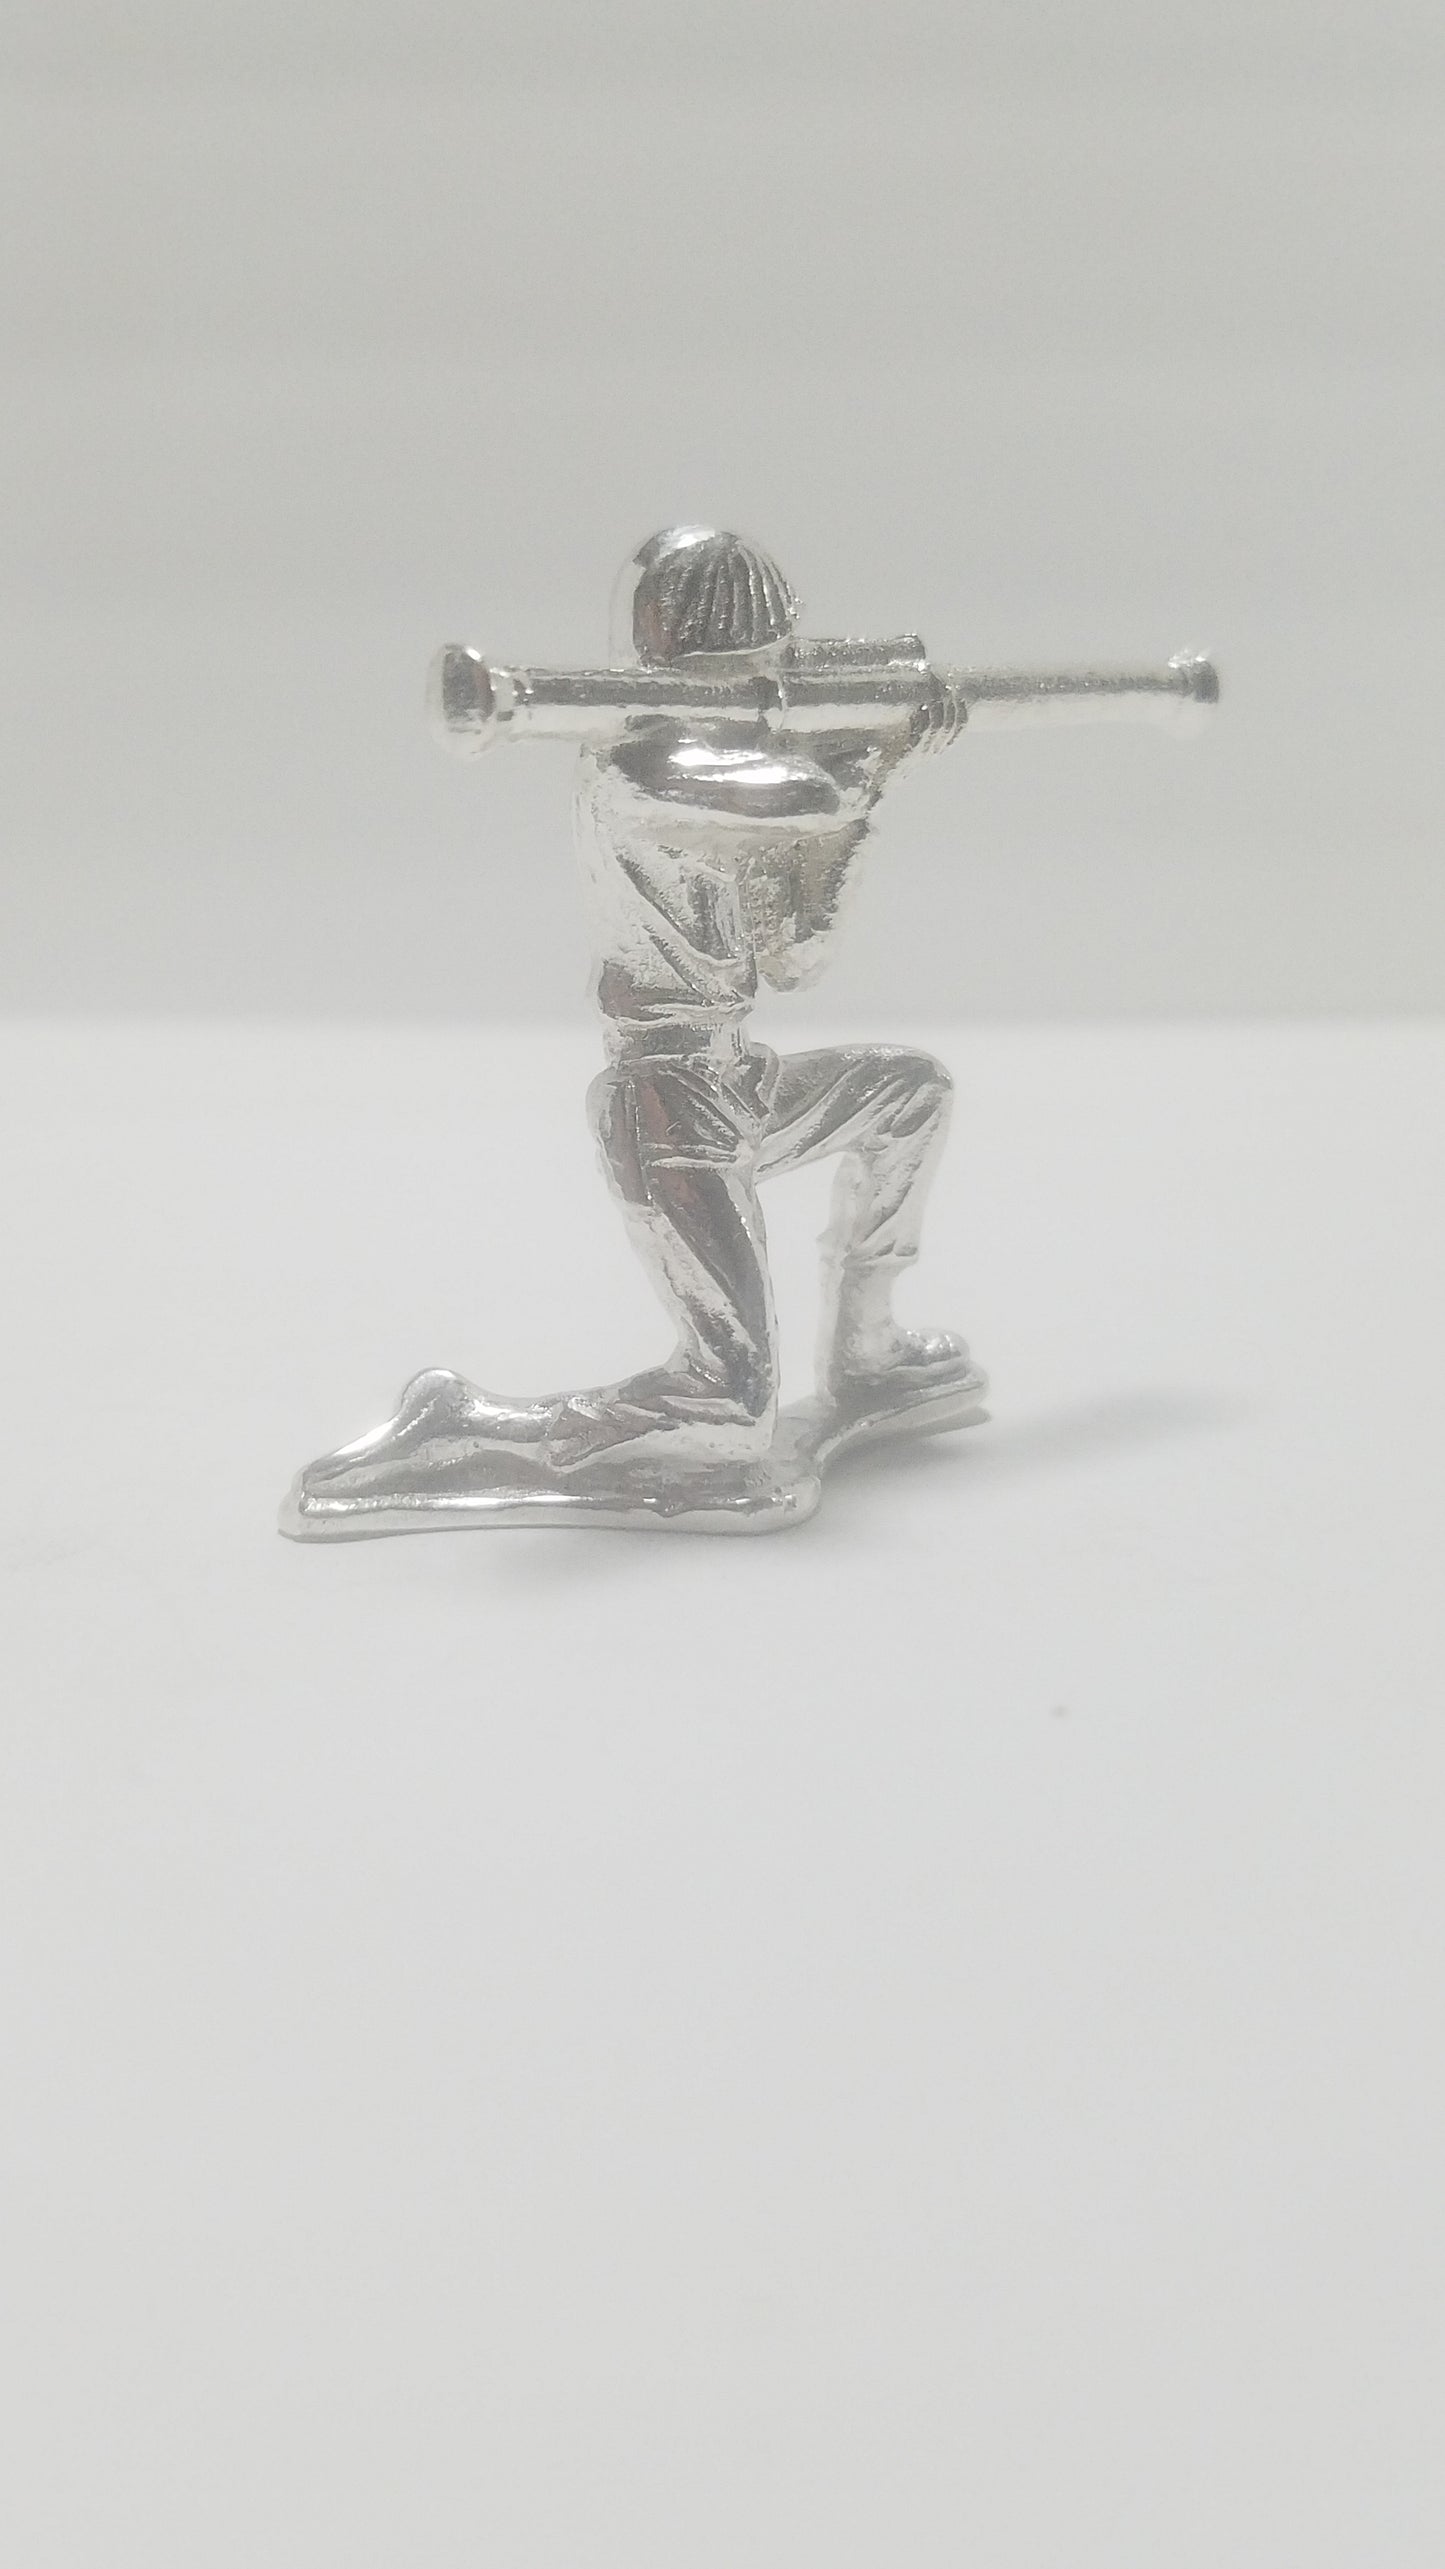 Classic Army Man Stovepipe Silver Toy Soldier .999 Fine Silver